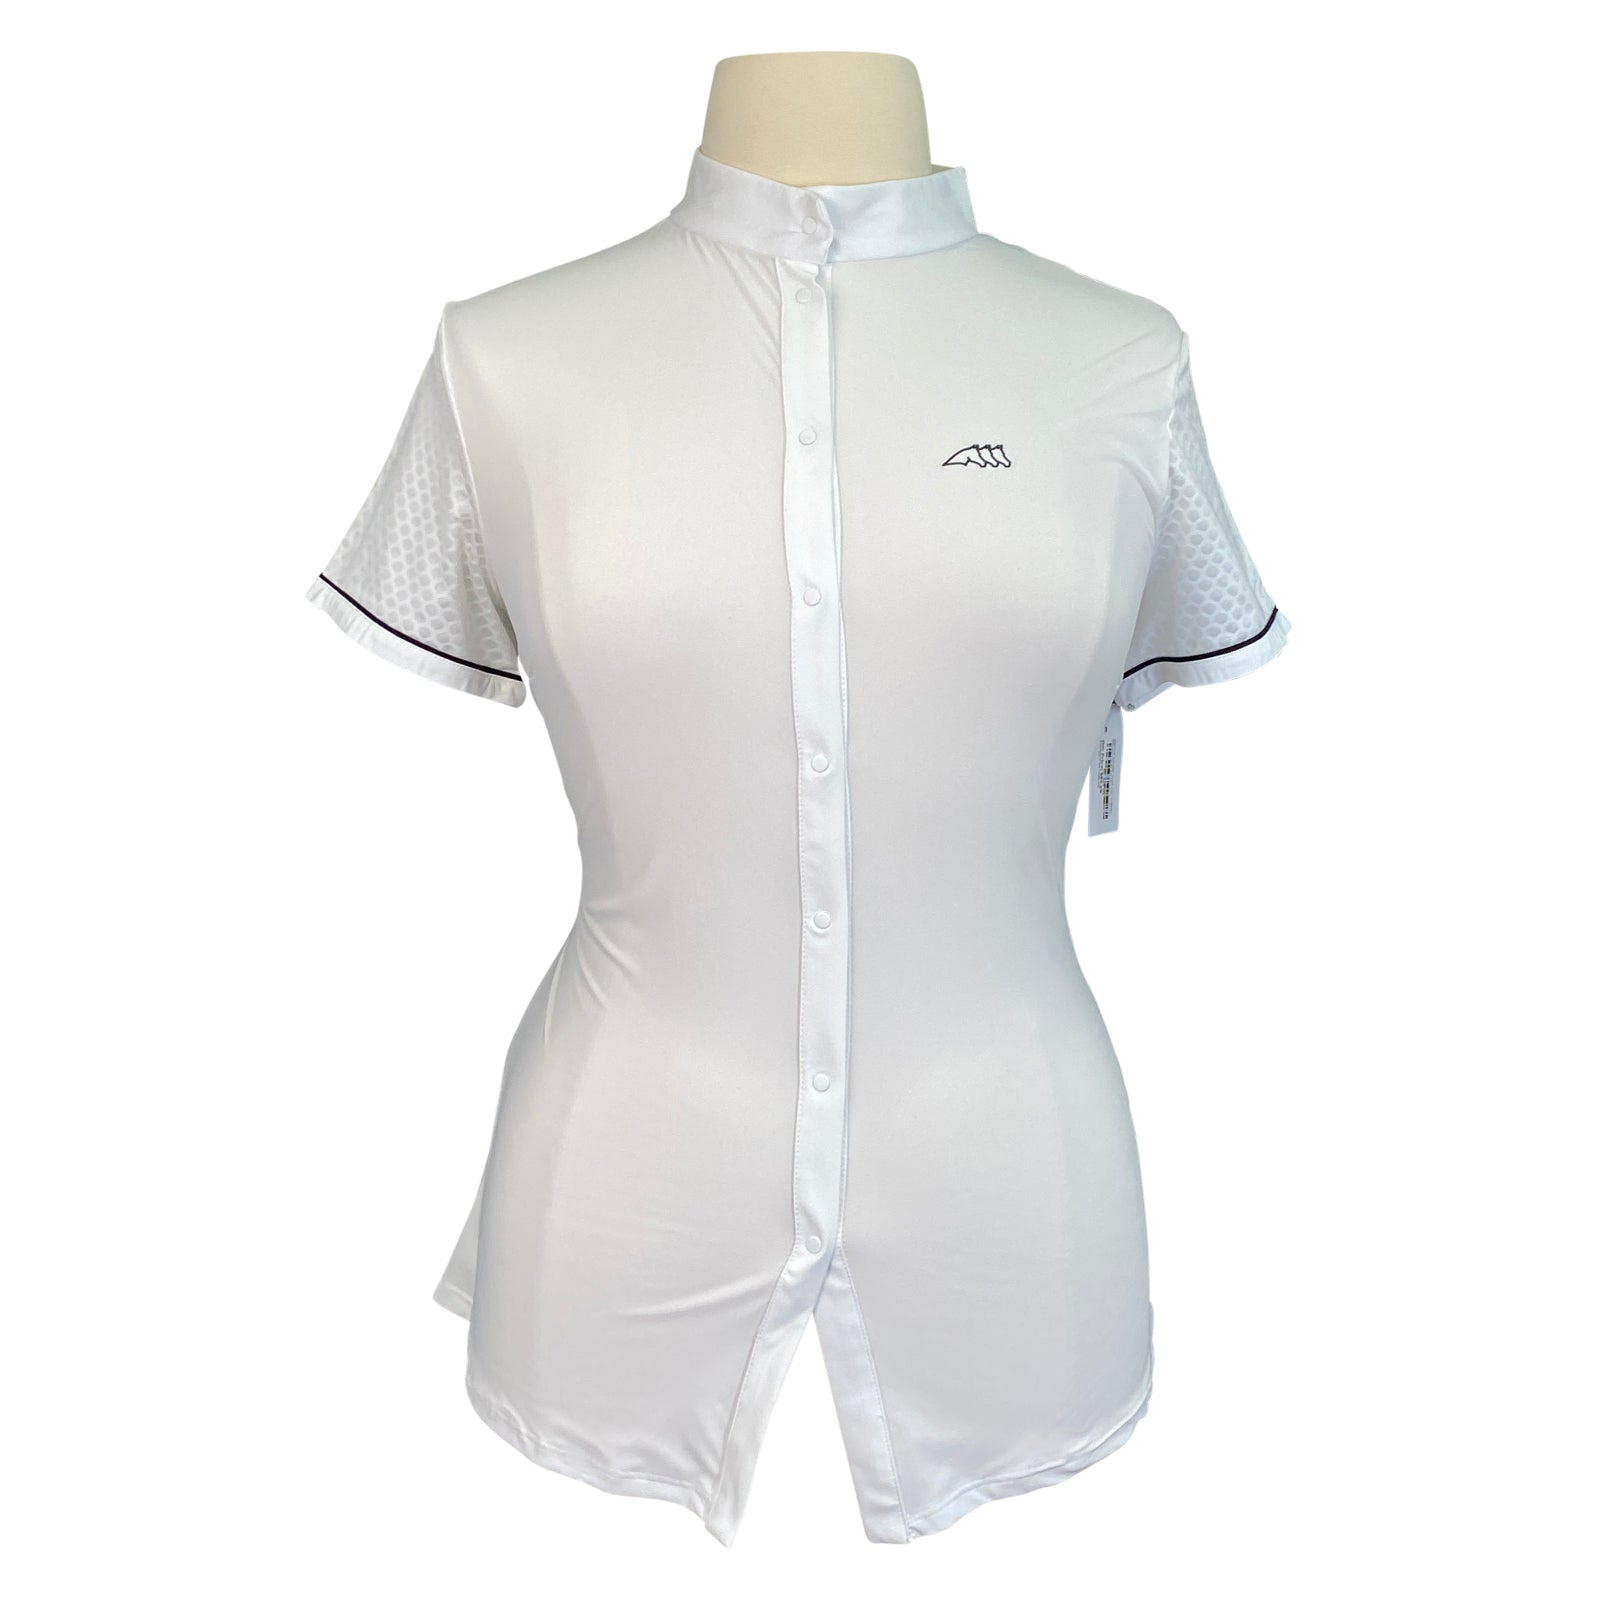 Equiline 'Cresida' Show Shirt in White